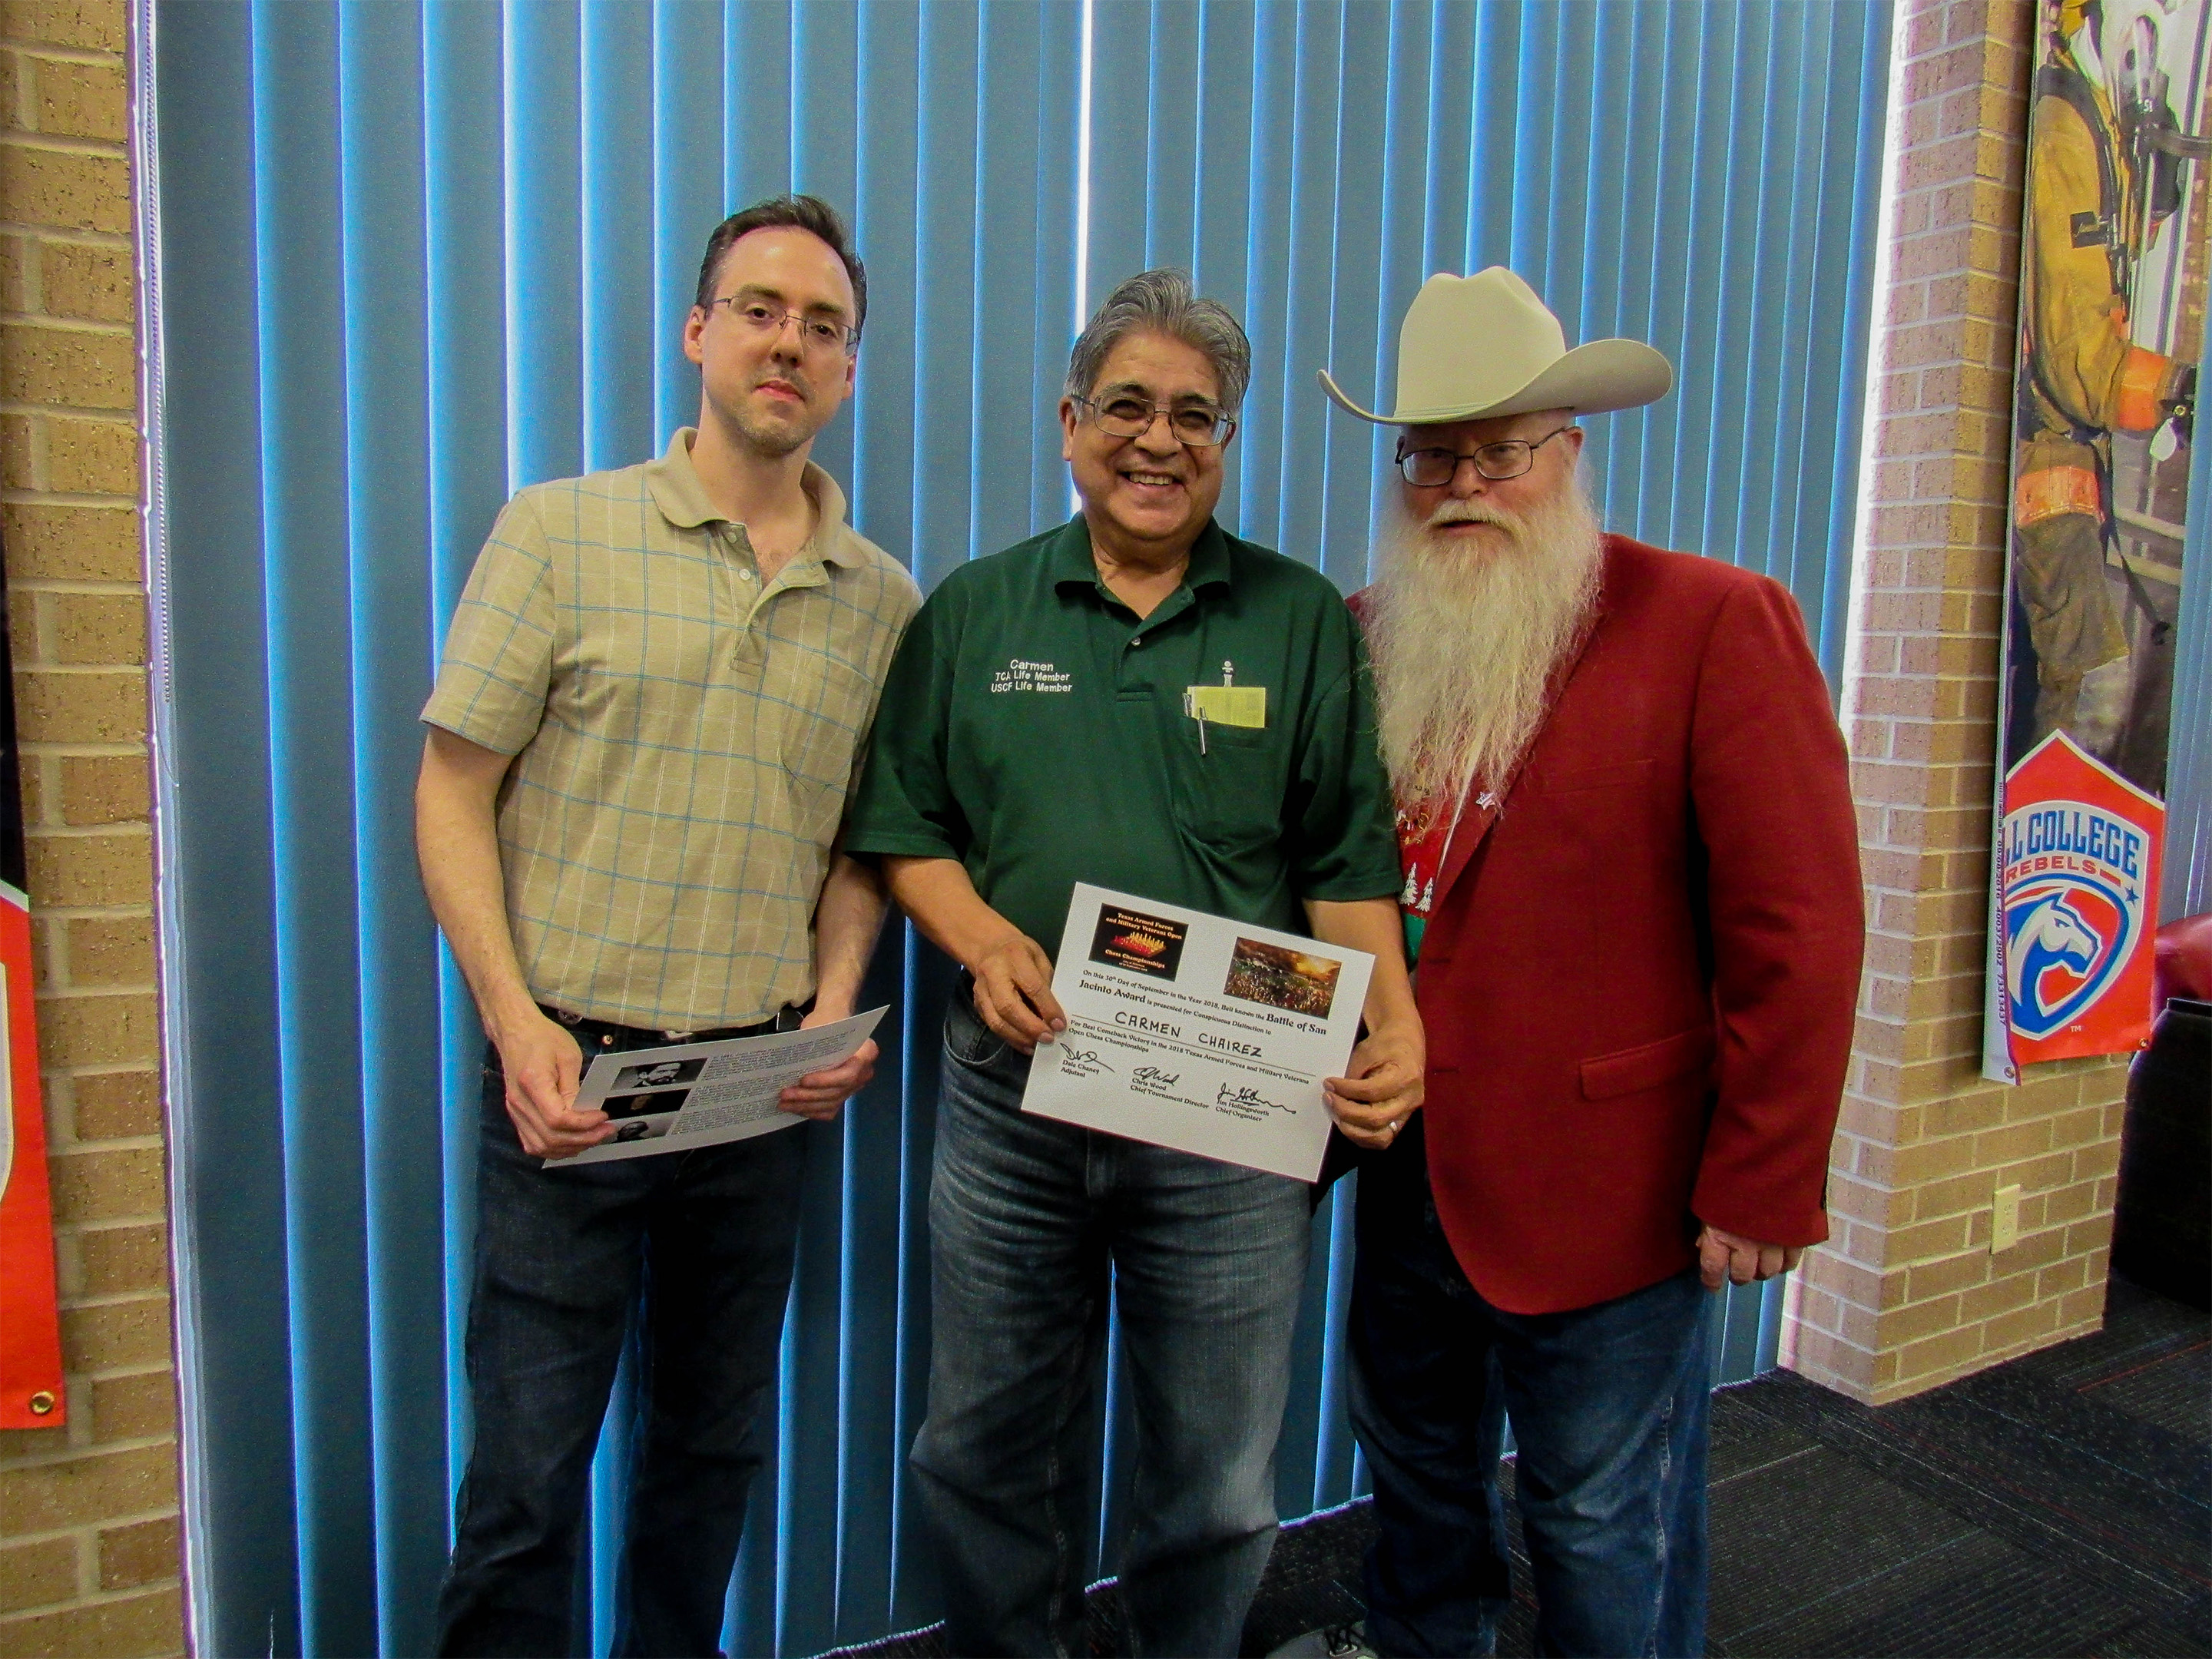 Carmen Chairez won the Battle of San Jacinto Award for playing an incredible Ruy Lopez Closed [C84] with the white pieces against a strong Navy veteran.  Games Judge Jeffrey Spyrison (left) and Chief Organizer Jim Hollingsworth (right) presented the award.  Photo by Sheryl McBroom.